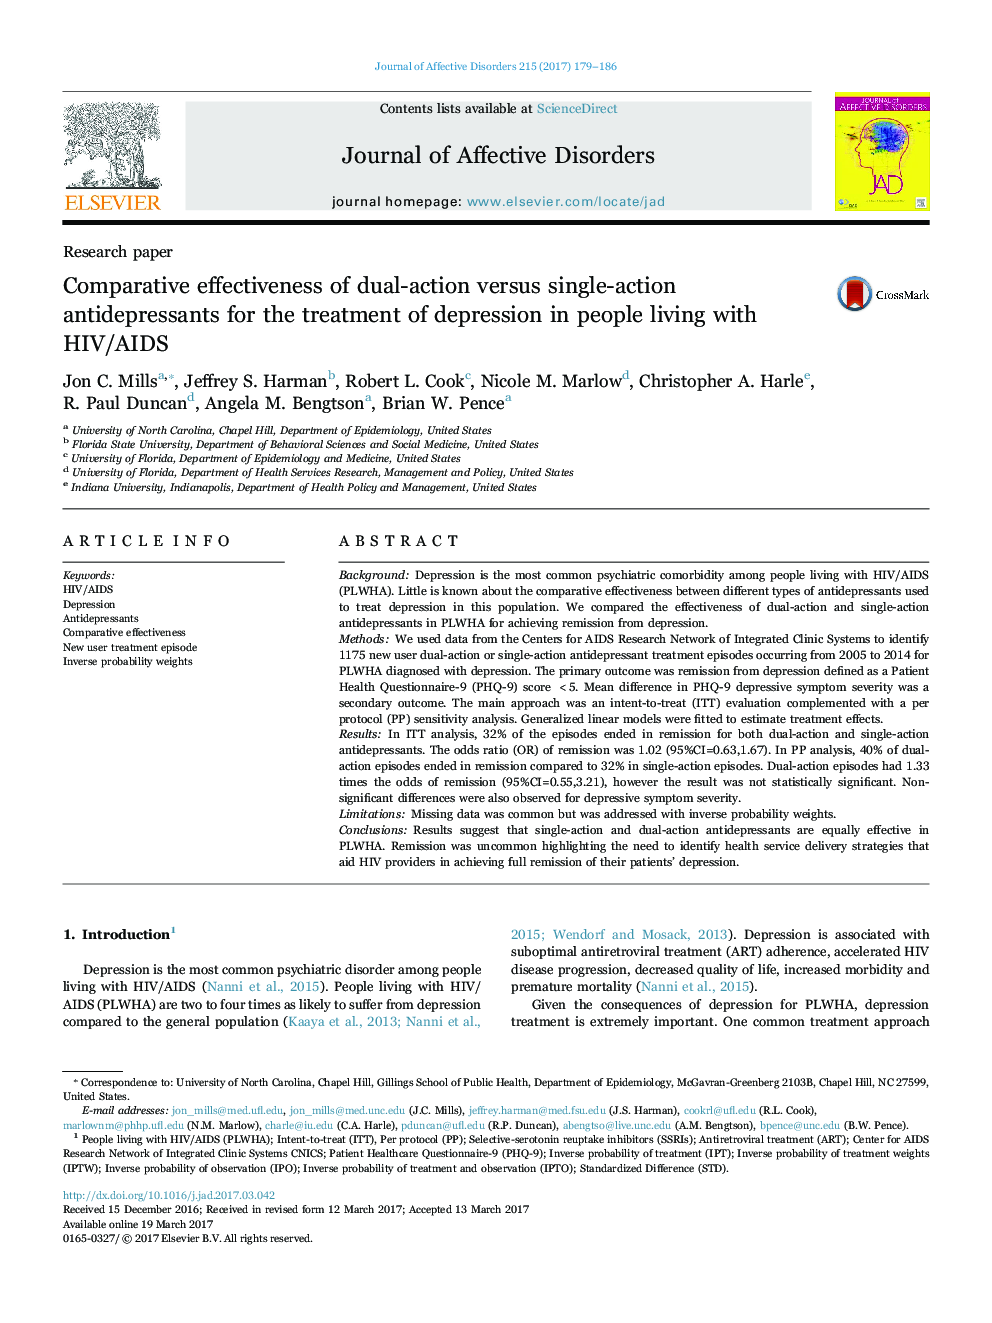 Research paperComparative effectiveness of dual-action versus single-action antidepressants for the treatment of depression in people living with HIV/AIDS